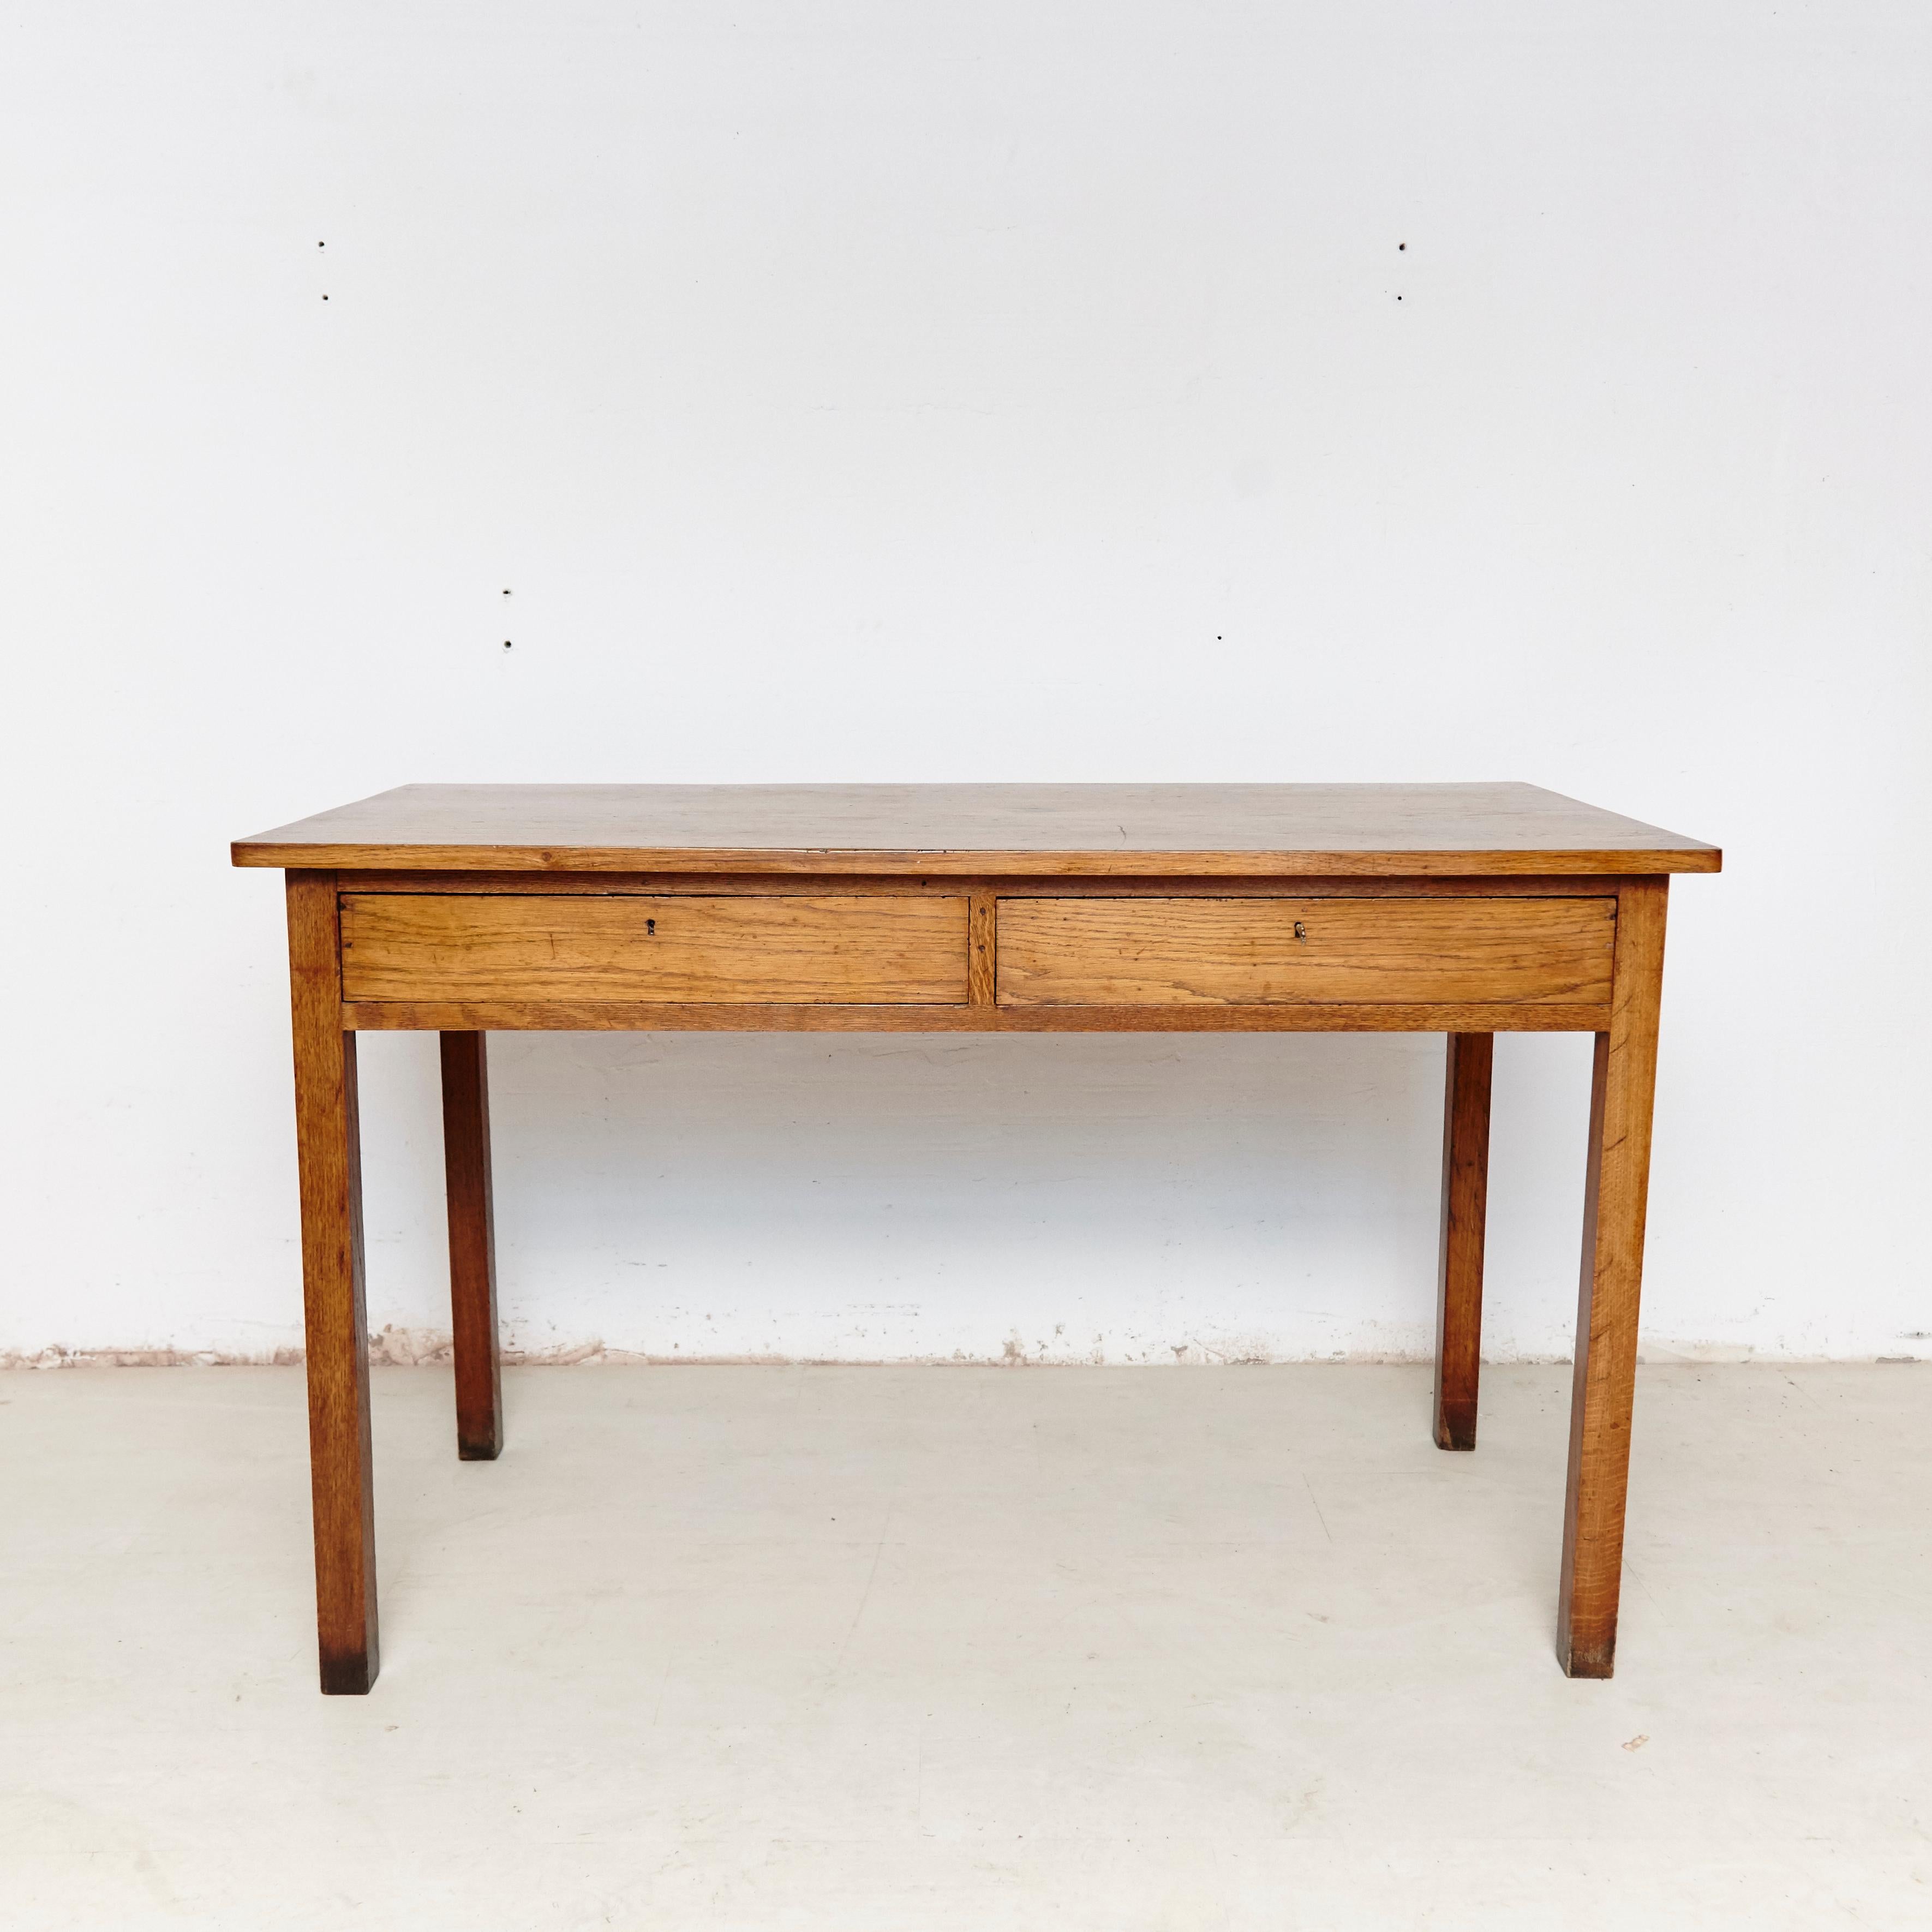 Oak French table, circa 1930
By Unknown designer.
Manufactured in France.

In original condition, with minor wear consistent of age and use, preserving a beautiful patina.